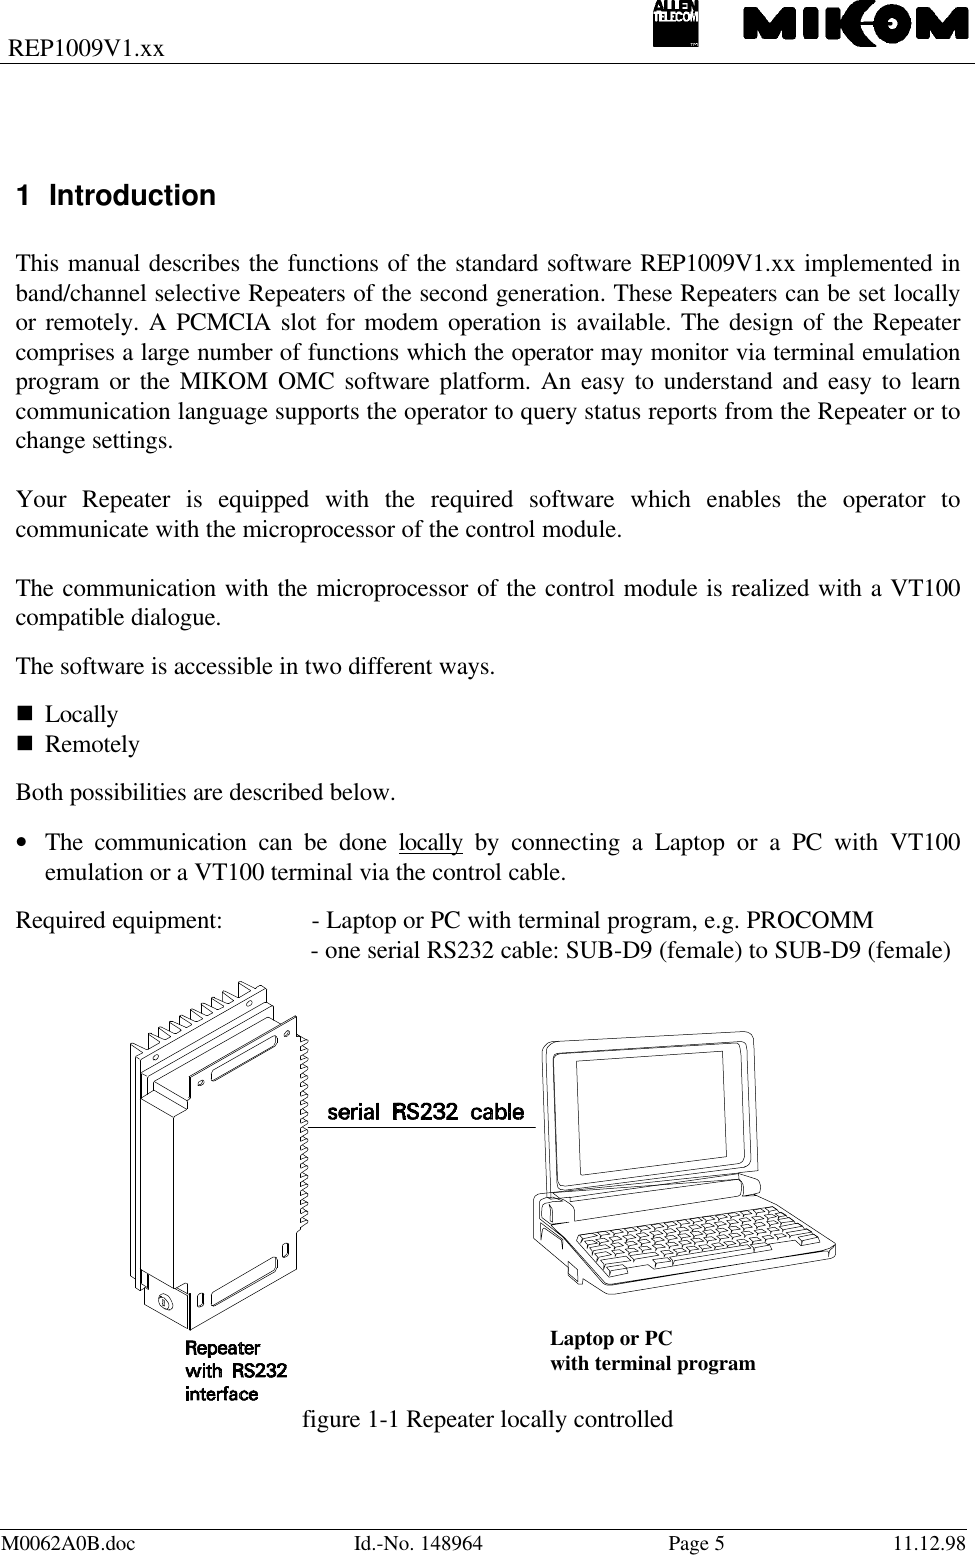 REP1009V1.xxM0062A0B.doc Id.-No. 148964 Page 511.12.981 IntroductionThis manual describes the functions of the standard software REP1009V1.xx implemented inband/channel selective Repeaters of the second generation. These Repeaters can be set locallyor remotely. A PCMCIA slot for modem operation is available. The design of the Repeatercomprises a large number of functions which the operator may monitor via terminal emulationprogram or the MIKOM OMC software platform. An easy to understand and easy to learncommunication language supports the operator to query status reports from the Repeater or tochange settings.Your Repeater is equipped with the required software which enables the operator tocommunicate with the microprocessor of the control module.The communication with the microprocessor of the control module is realized with a VT100compatible dialogue.The software is accessible in two different ways.n Locallyn RemotelyBoth possibilities are described below.• The communication can be done locally by connecting a Laptop or a PC with VT100emulation or a VT100 terminal via the control cable.Required equipment: - Laptop or PC with terminal program, e.g. PROCOMM- one serial RS232 cable: SUB-D9 (female) to SUB-D9 (female)Laptop or PCwith terminal programfigure 1-1 Repeater locally controlled